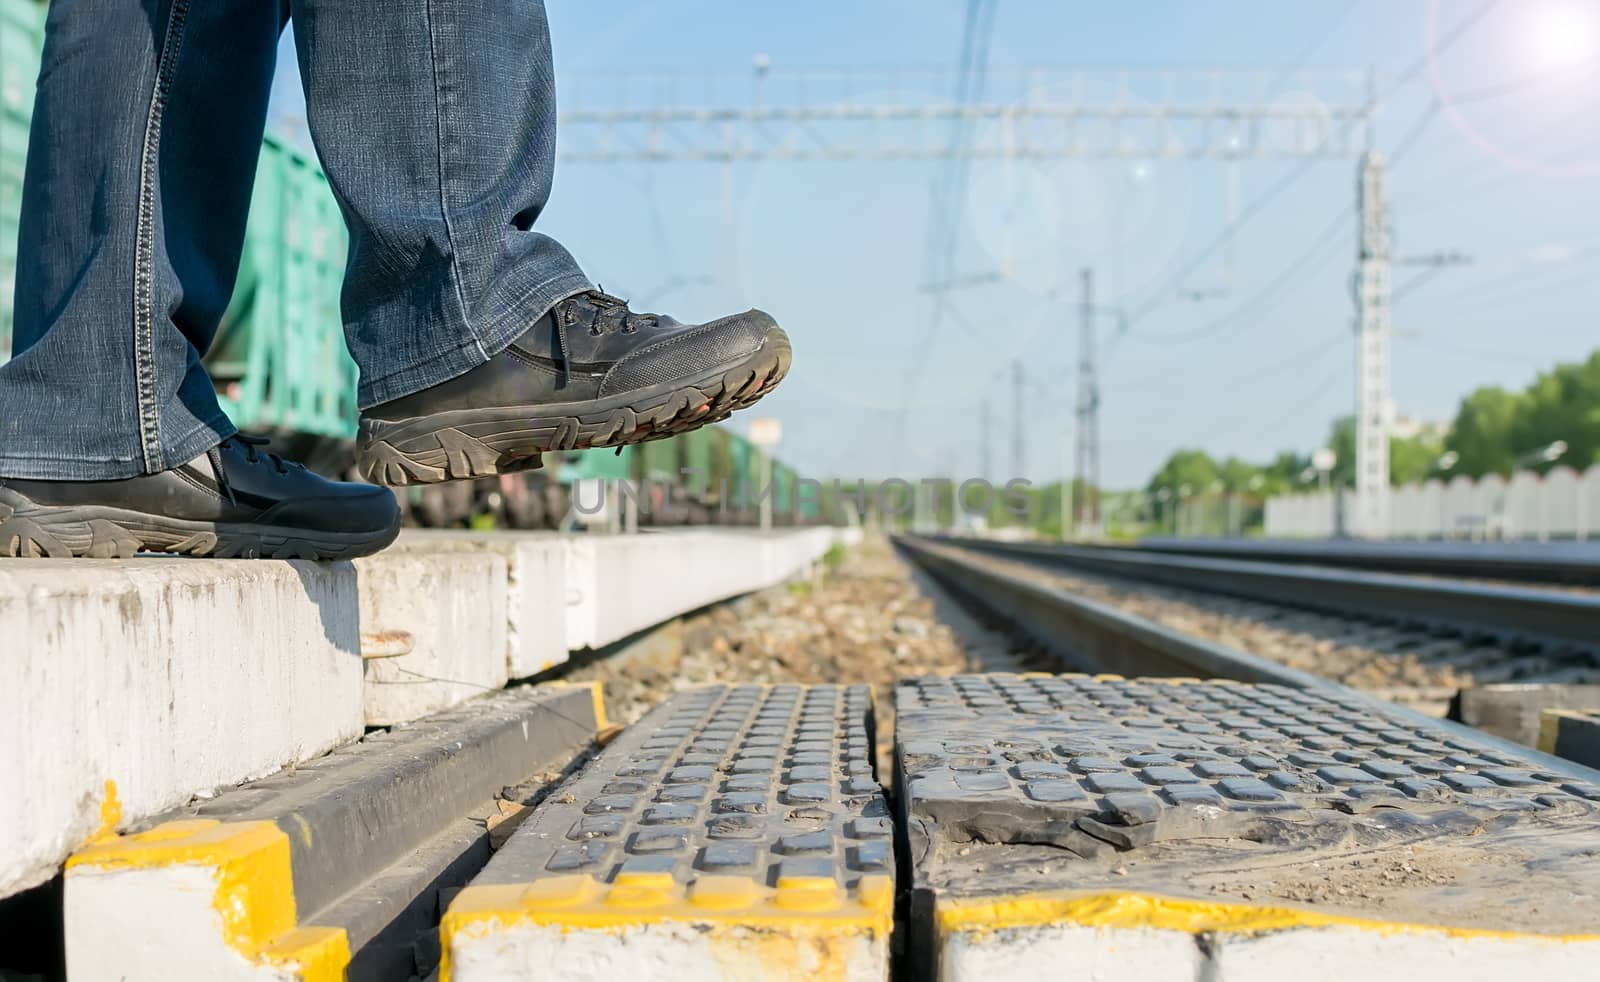 Pedestrian's feet step on a pedestrian crossing through the rails at the railway station on the background of freight cars